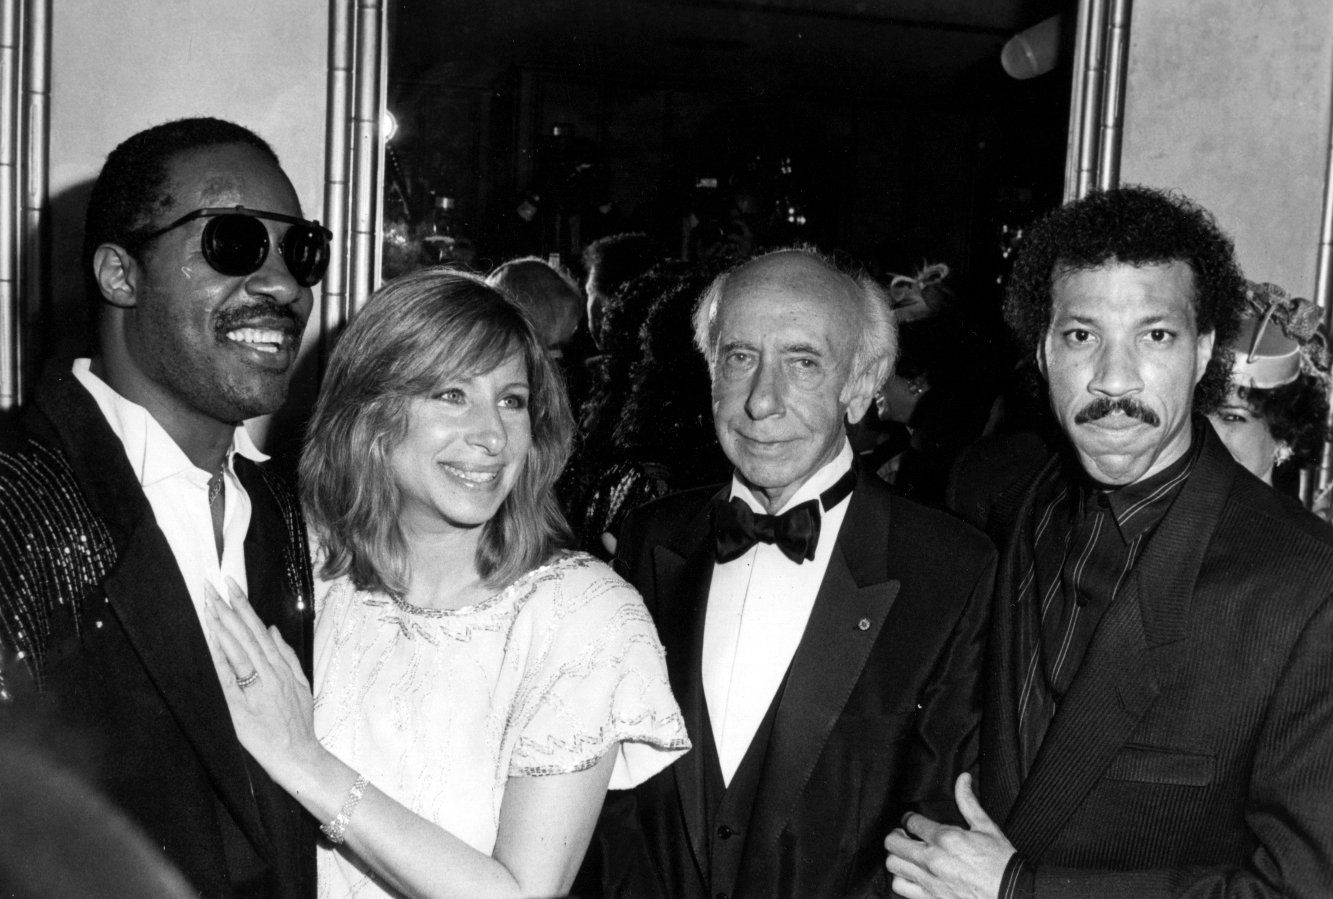 Stevie Wonder, Barbra Streisand, Martin Gould, and Lionel Ritchie at the 1986 ASCAP Awards.